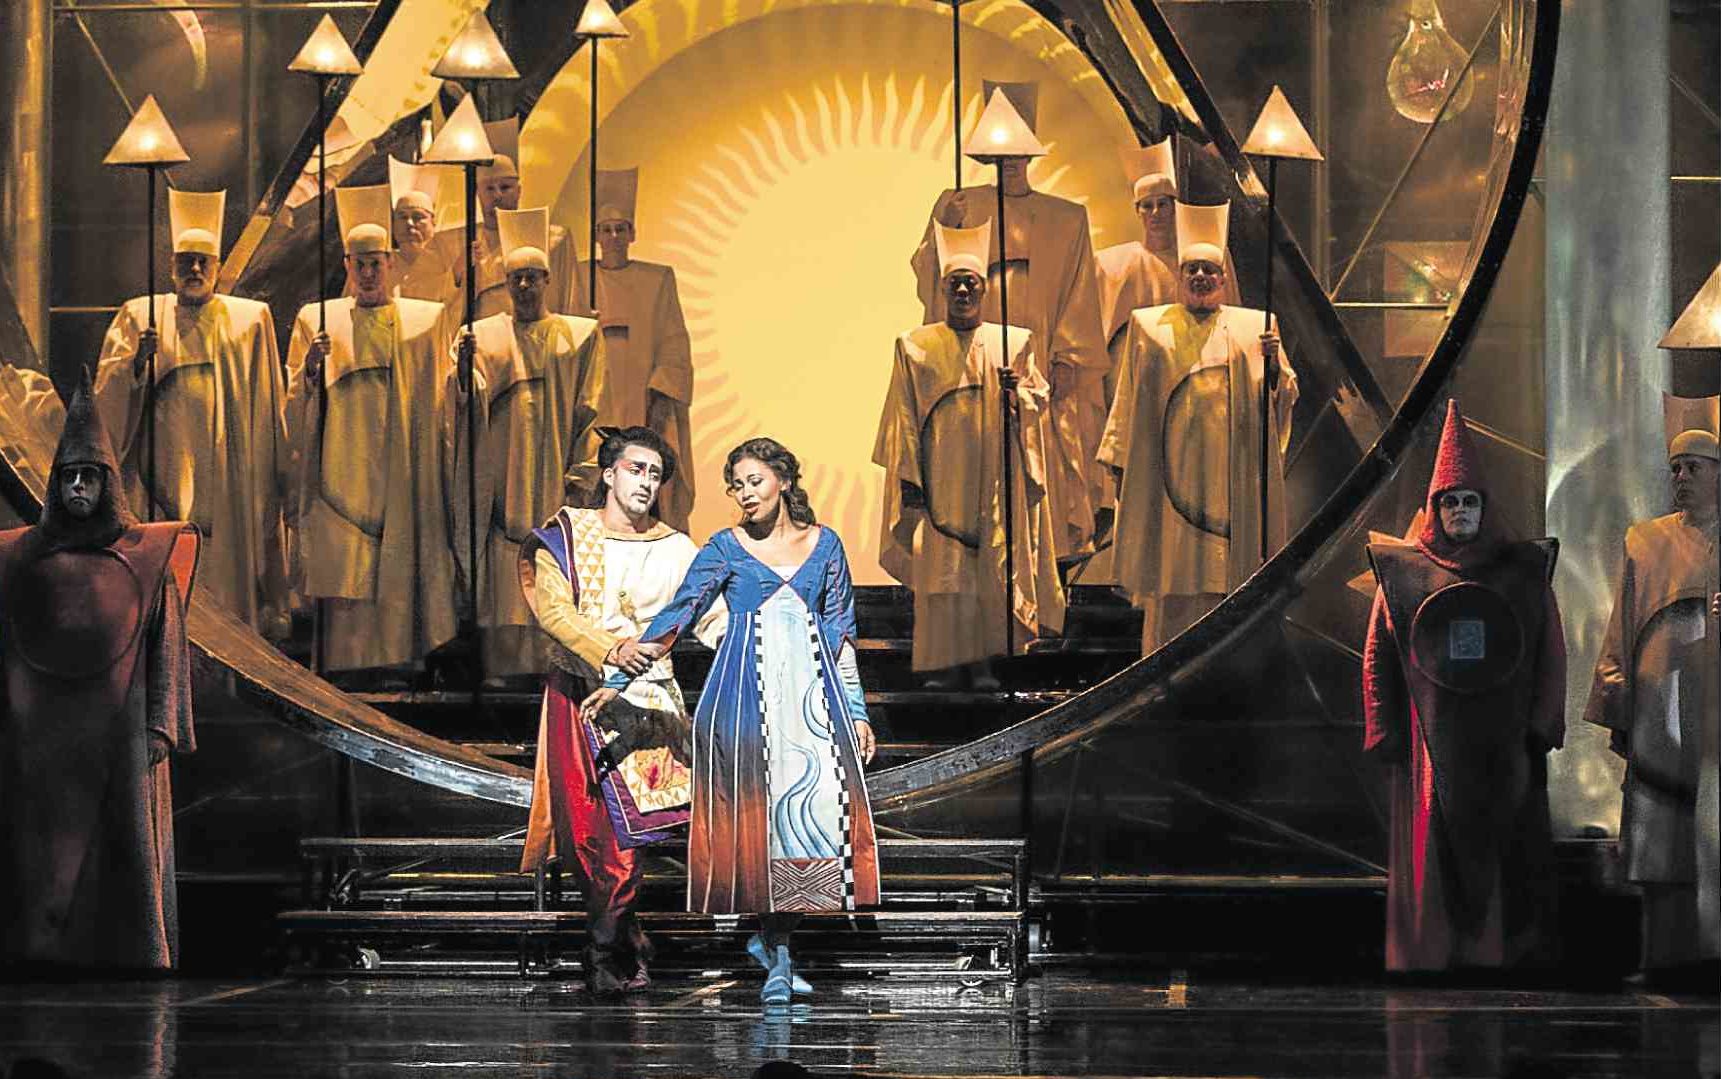 CCP to open 2019 season of MET Opera in HD with Mozart’s ‘Magic Flute’